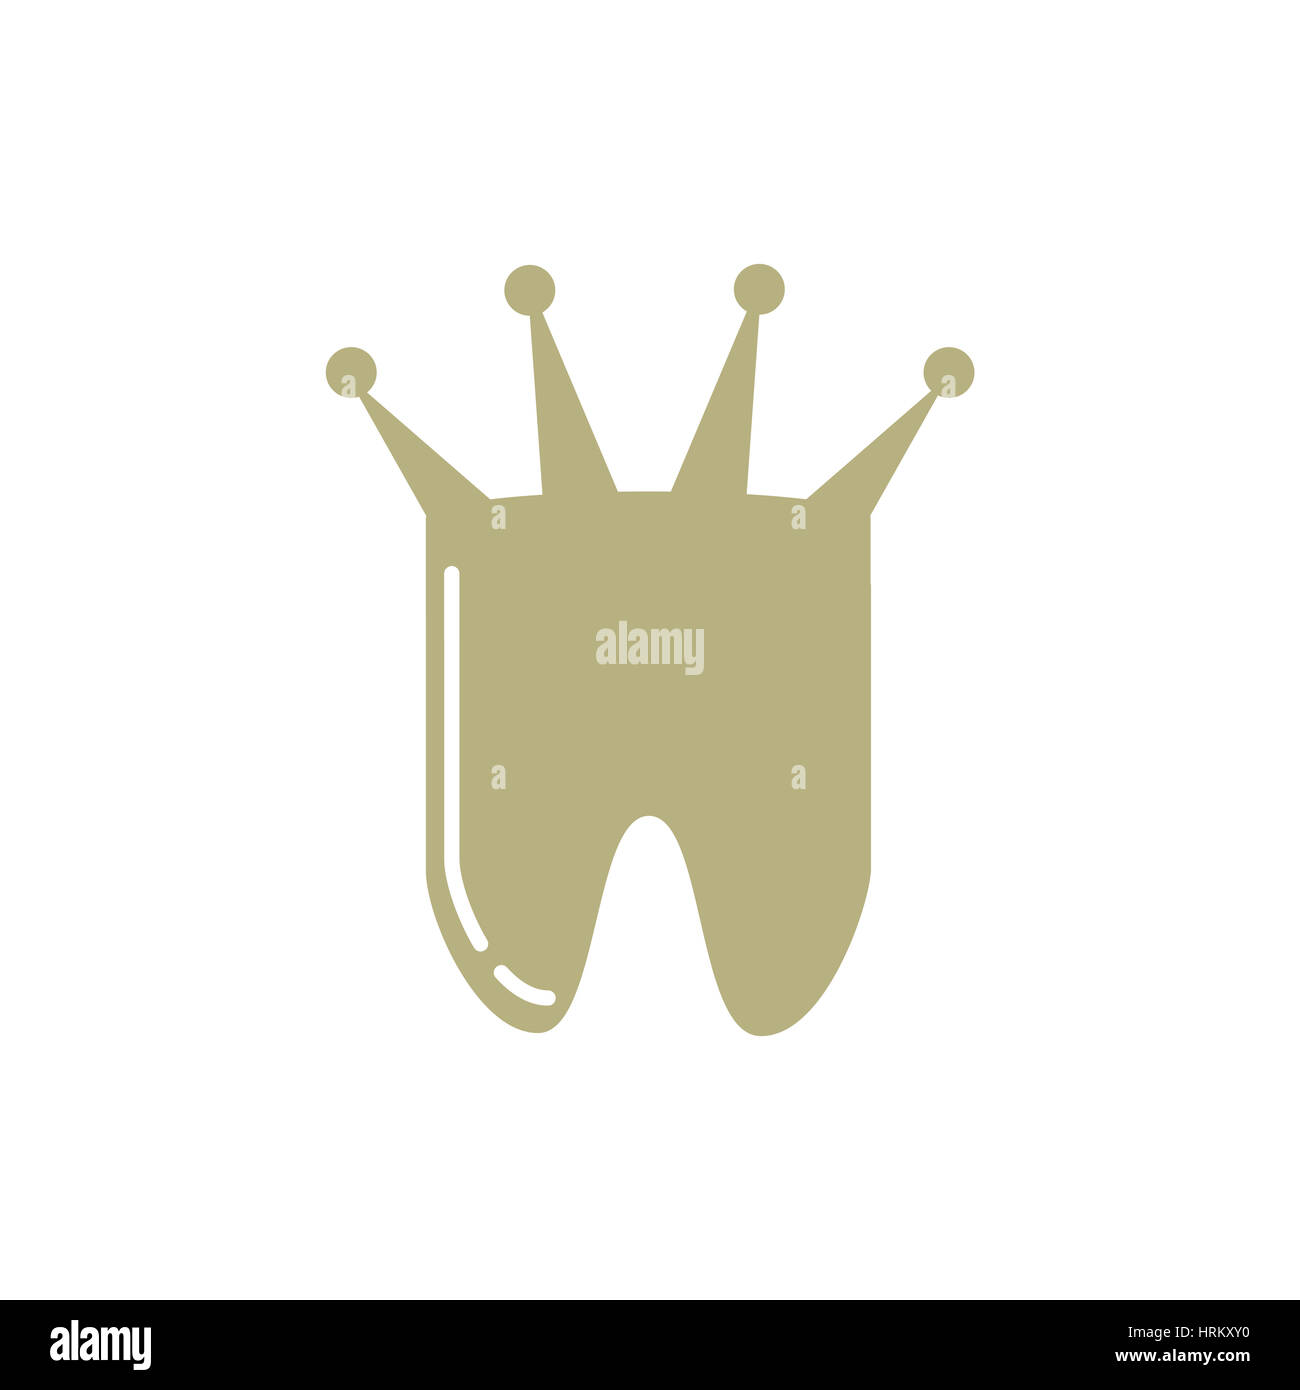 Minimal illustration of a tooth and a crown that can be used for logo or as isolated graphic element Stock Photo